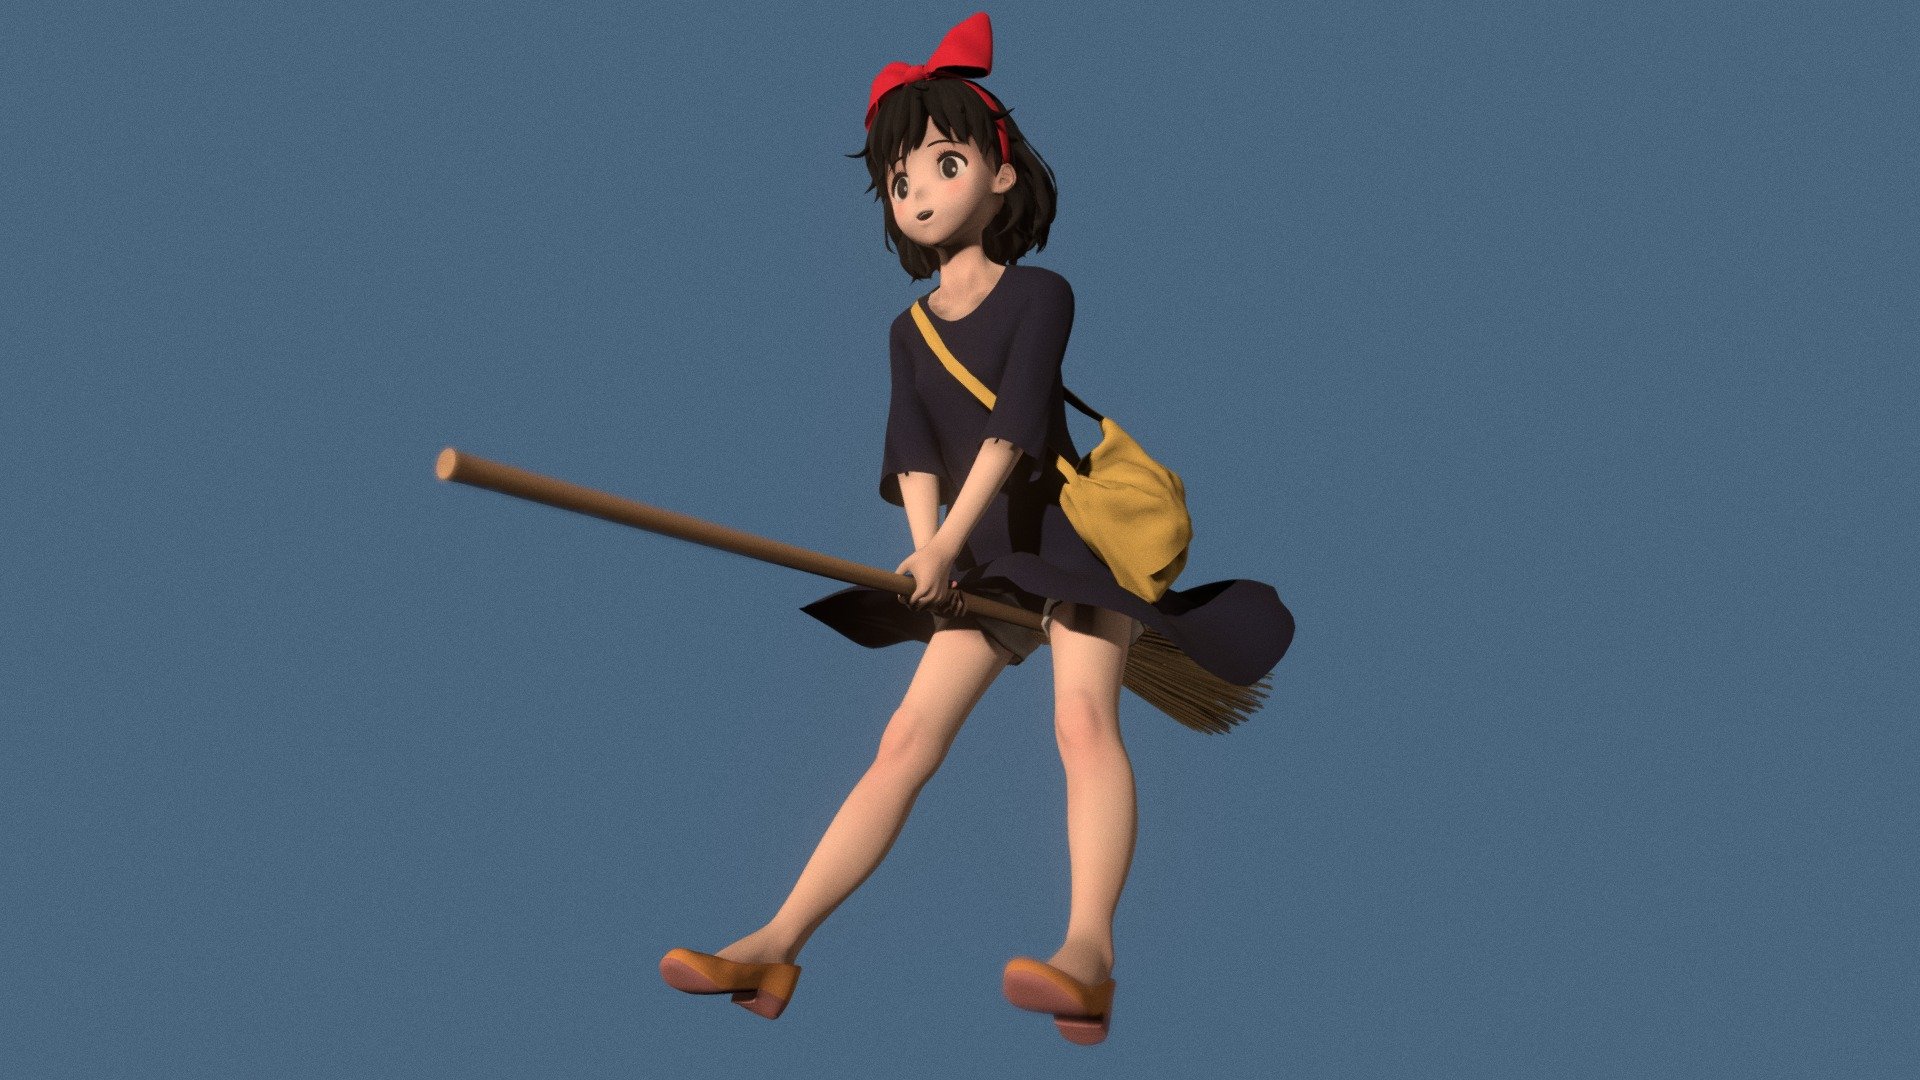 Posed model of anime girl Kiki (Kiki’s Delivery Service).

This product include .FBX (ver. 7200) and .MAX (ver. 2010) files.

Rigged version: https://sketchfab.com/3d-models/t-pose-rigged-model-of-kiki-1aef735955f647c986d33a71c443fe93

I support convert this 3D model to various file formats: 3DS; AI; ASE; DAE; DWF; DWG; DXF; FLT; HTR; IGS; M3G; MQO; OBJ; SAT; STL; W3D; WRL; X.

You can buy all of my models in one pack to save cost: https://sketchfab.com/3d-models/all-of-my-anime-girls-c5a56156994e4193b9e8fa21a3b8360b

And I can make commission models.

If you have any questions, please leave a comment or contact me via my email 3d.eden.project@gmail.com 3d model